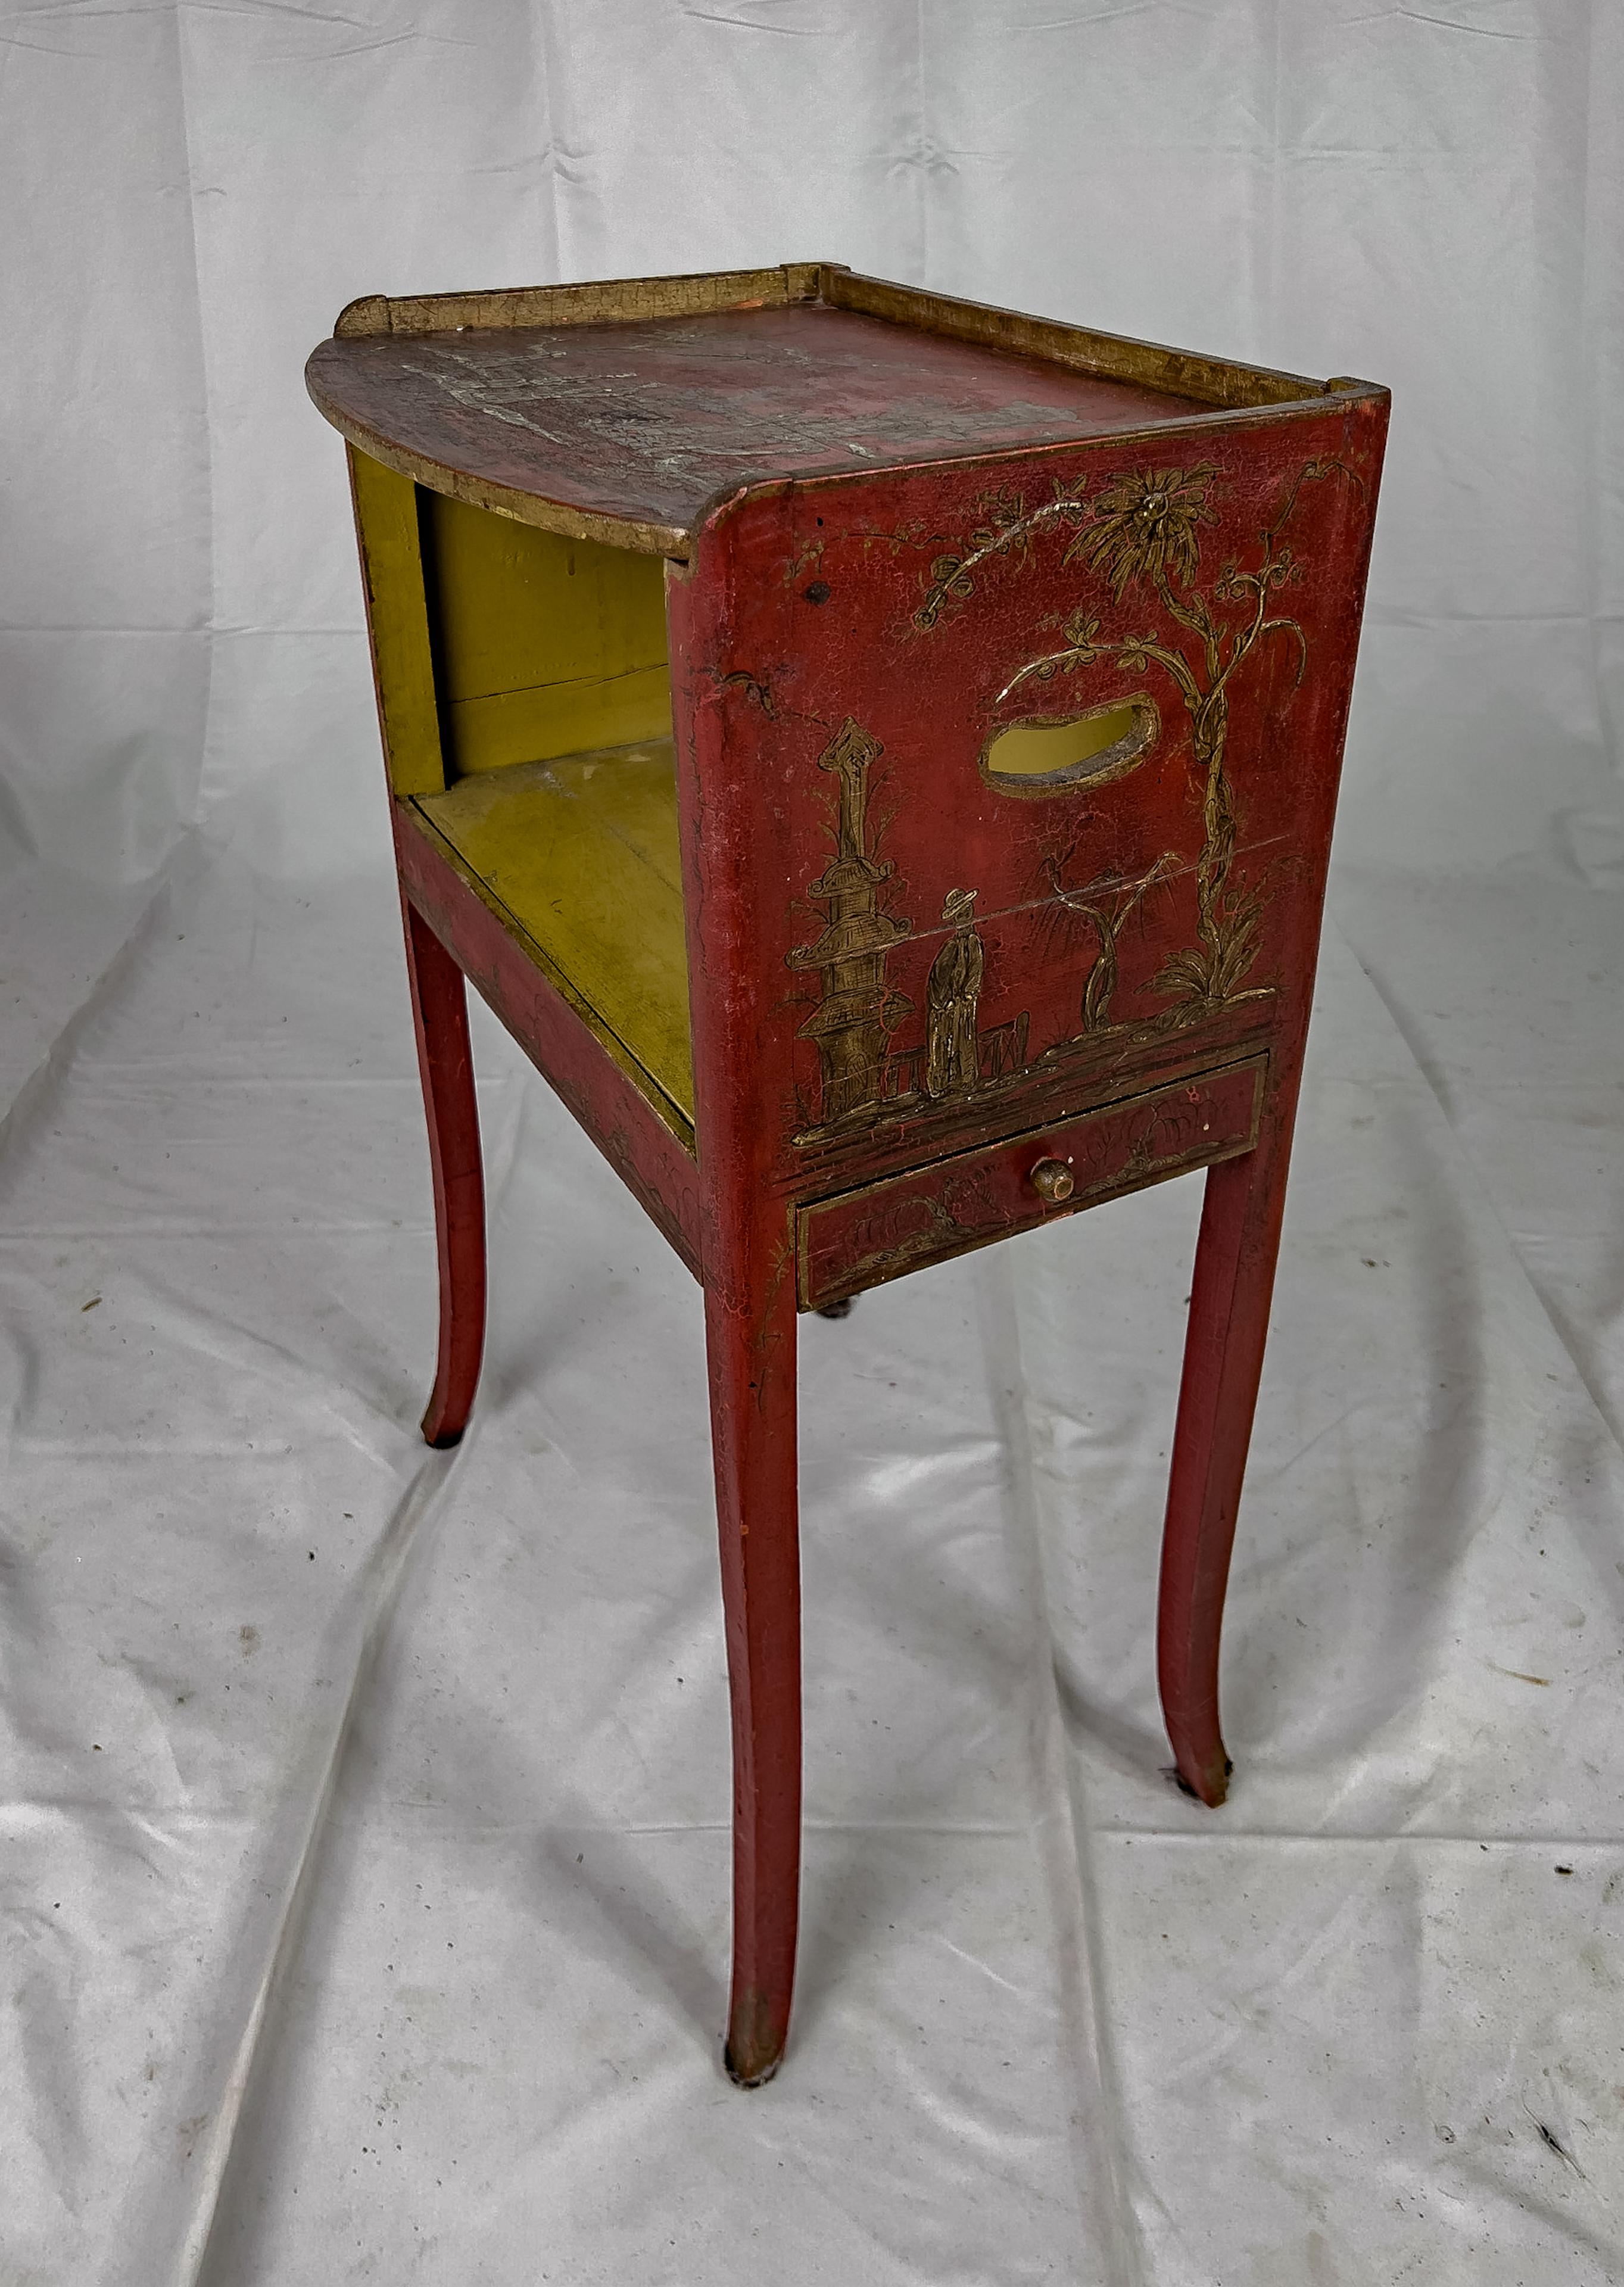 20th Century Hand Painted Red Chinoiserie Side Table. This piece is hand painted on all sides, has cut out handles on the sides, a discreet drawer on one side, top surface has an open recess underneath for display and splayed legs.